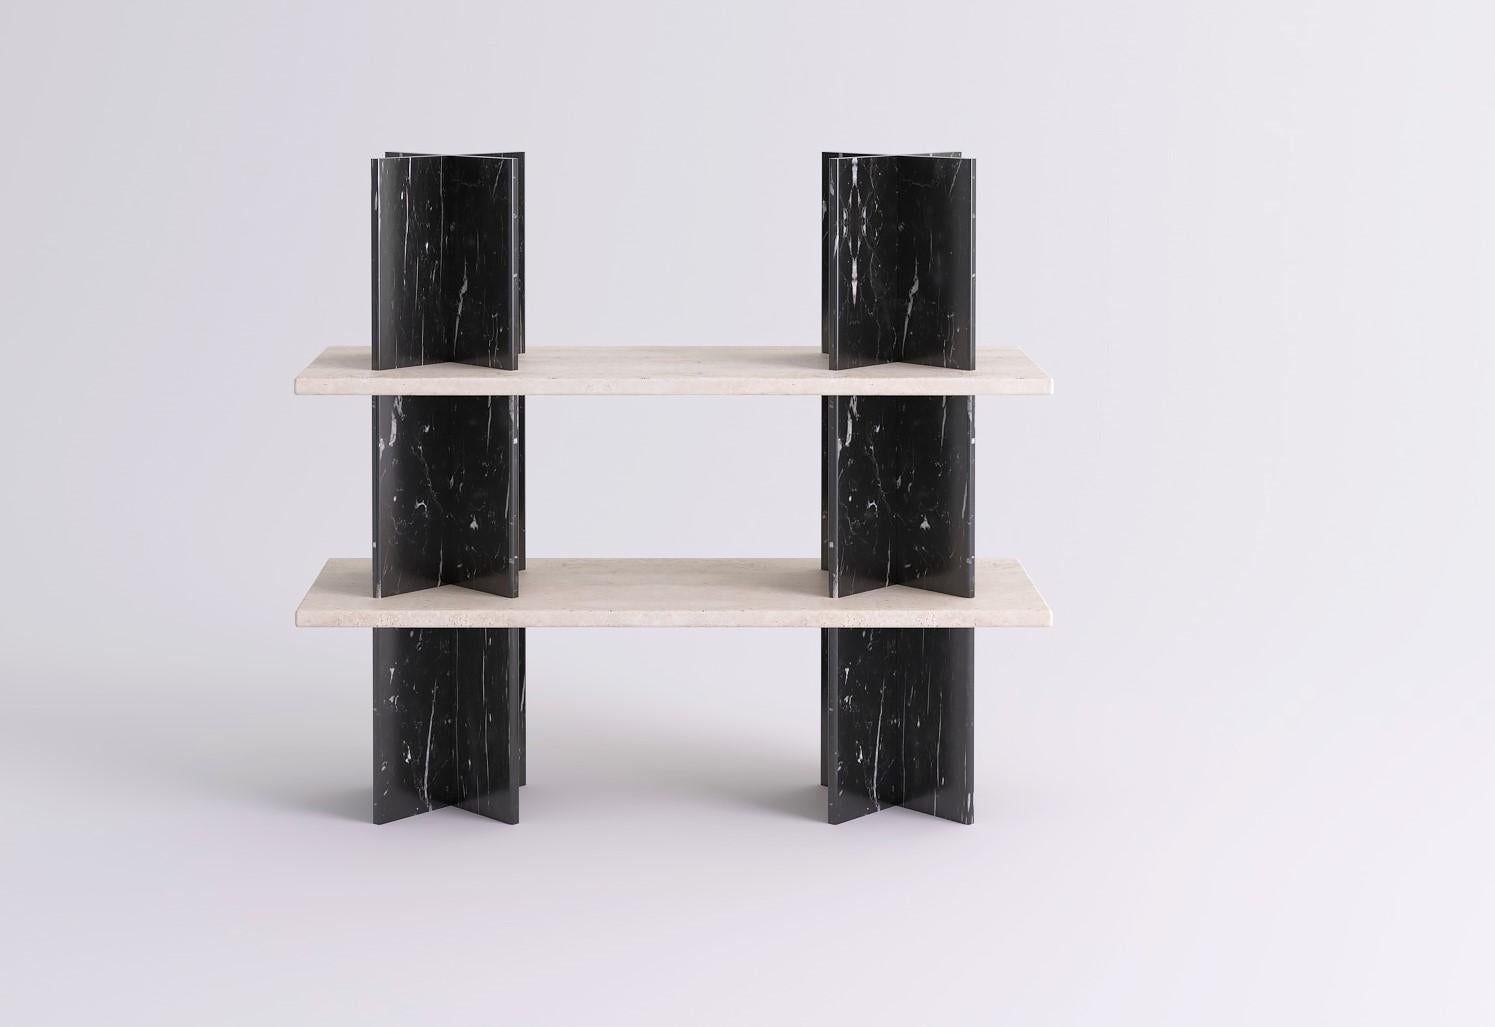 Monument Shelves by Mathieu Girard & Gauthier Pouillart
Dimensions: L 130 x H 117
Materials: White travertine shelves - black marble (marquina) columns
Material available: Birchwood, white marble, green marble, black marble, Pele de tigre marble,